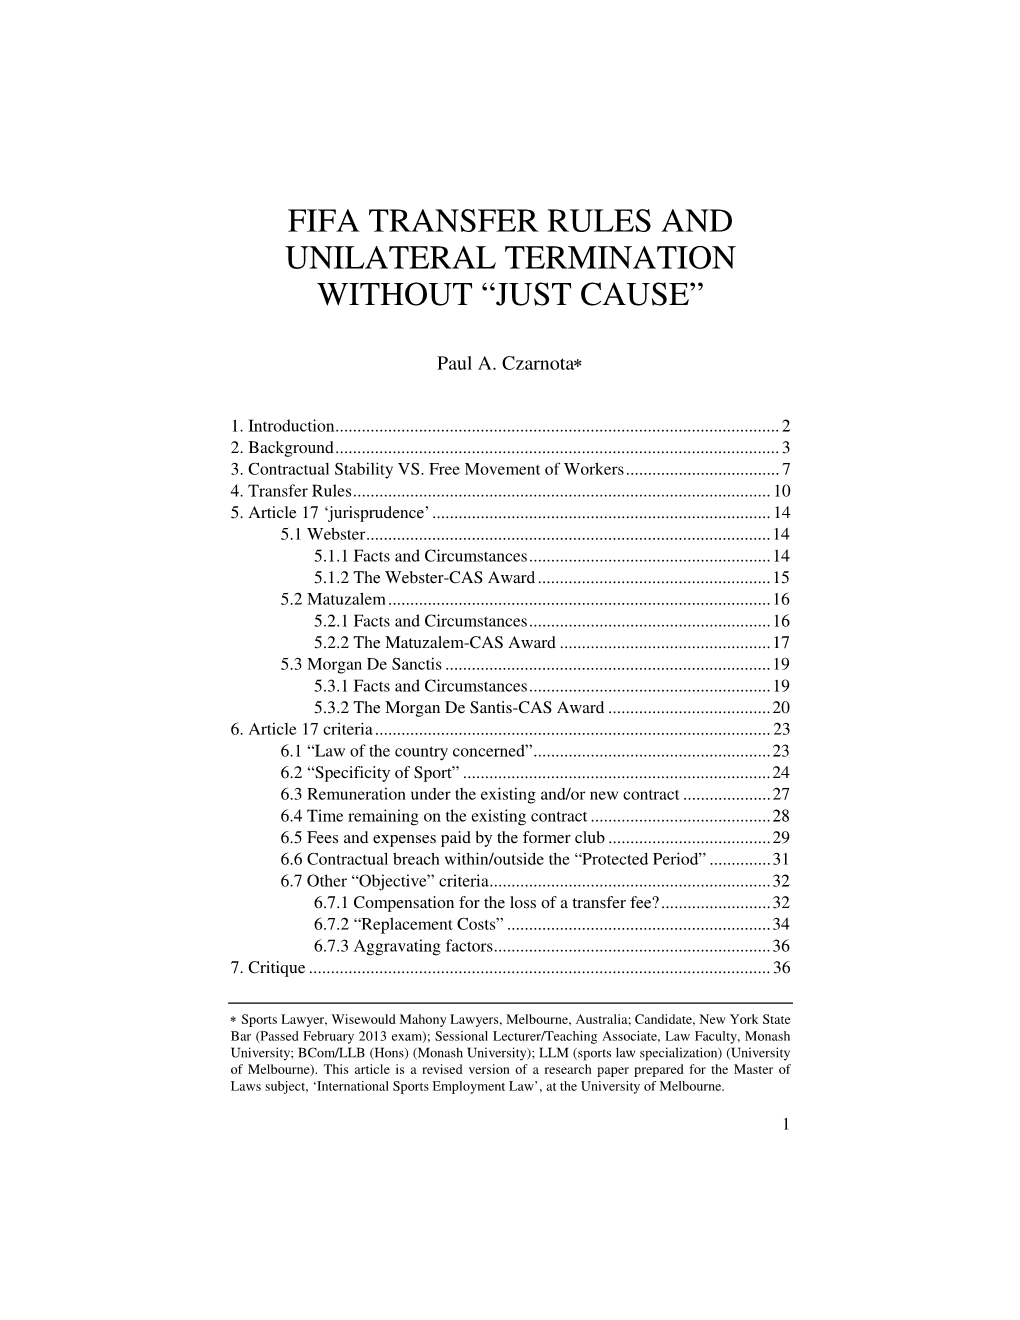 FIFA Transfer Rules and Unilateral Termination Without Â•Œjust Causeâ•Š